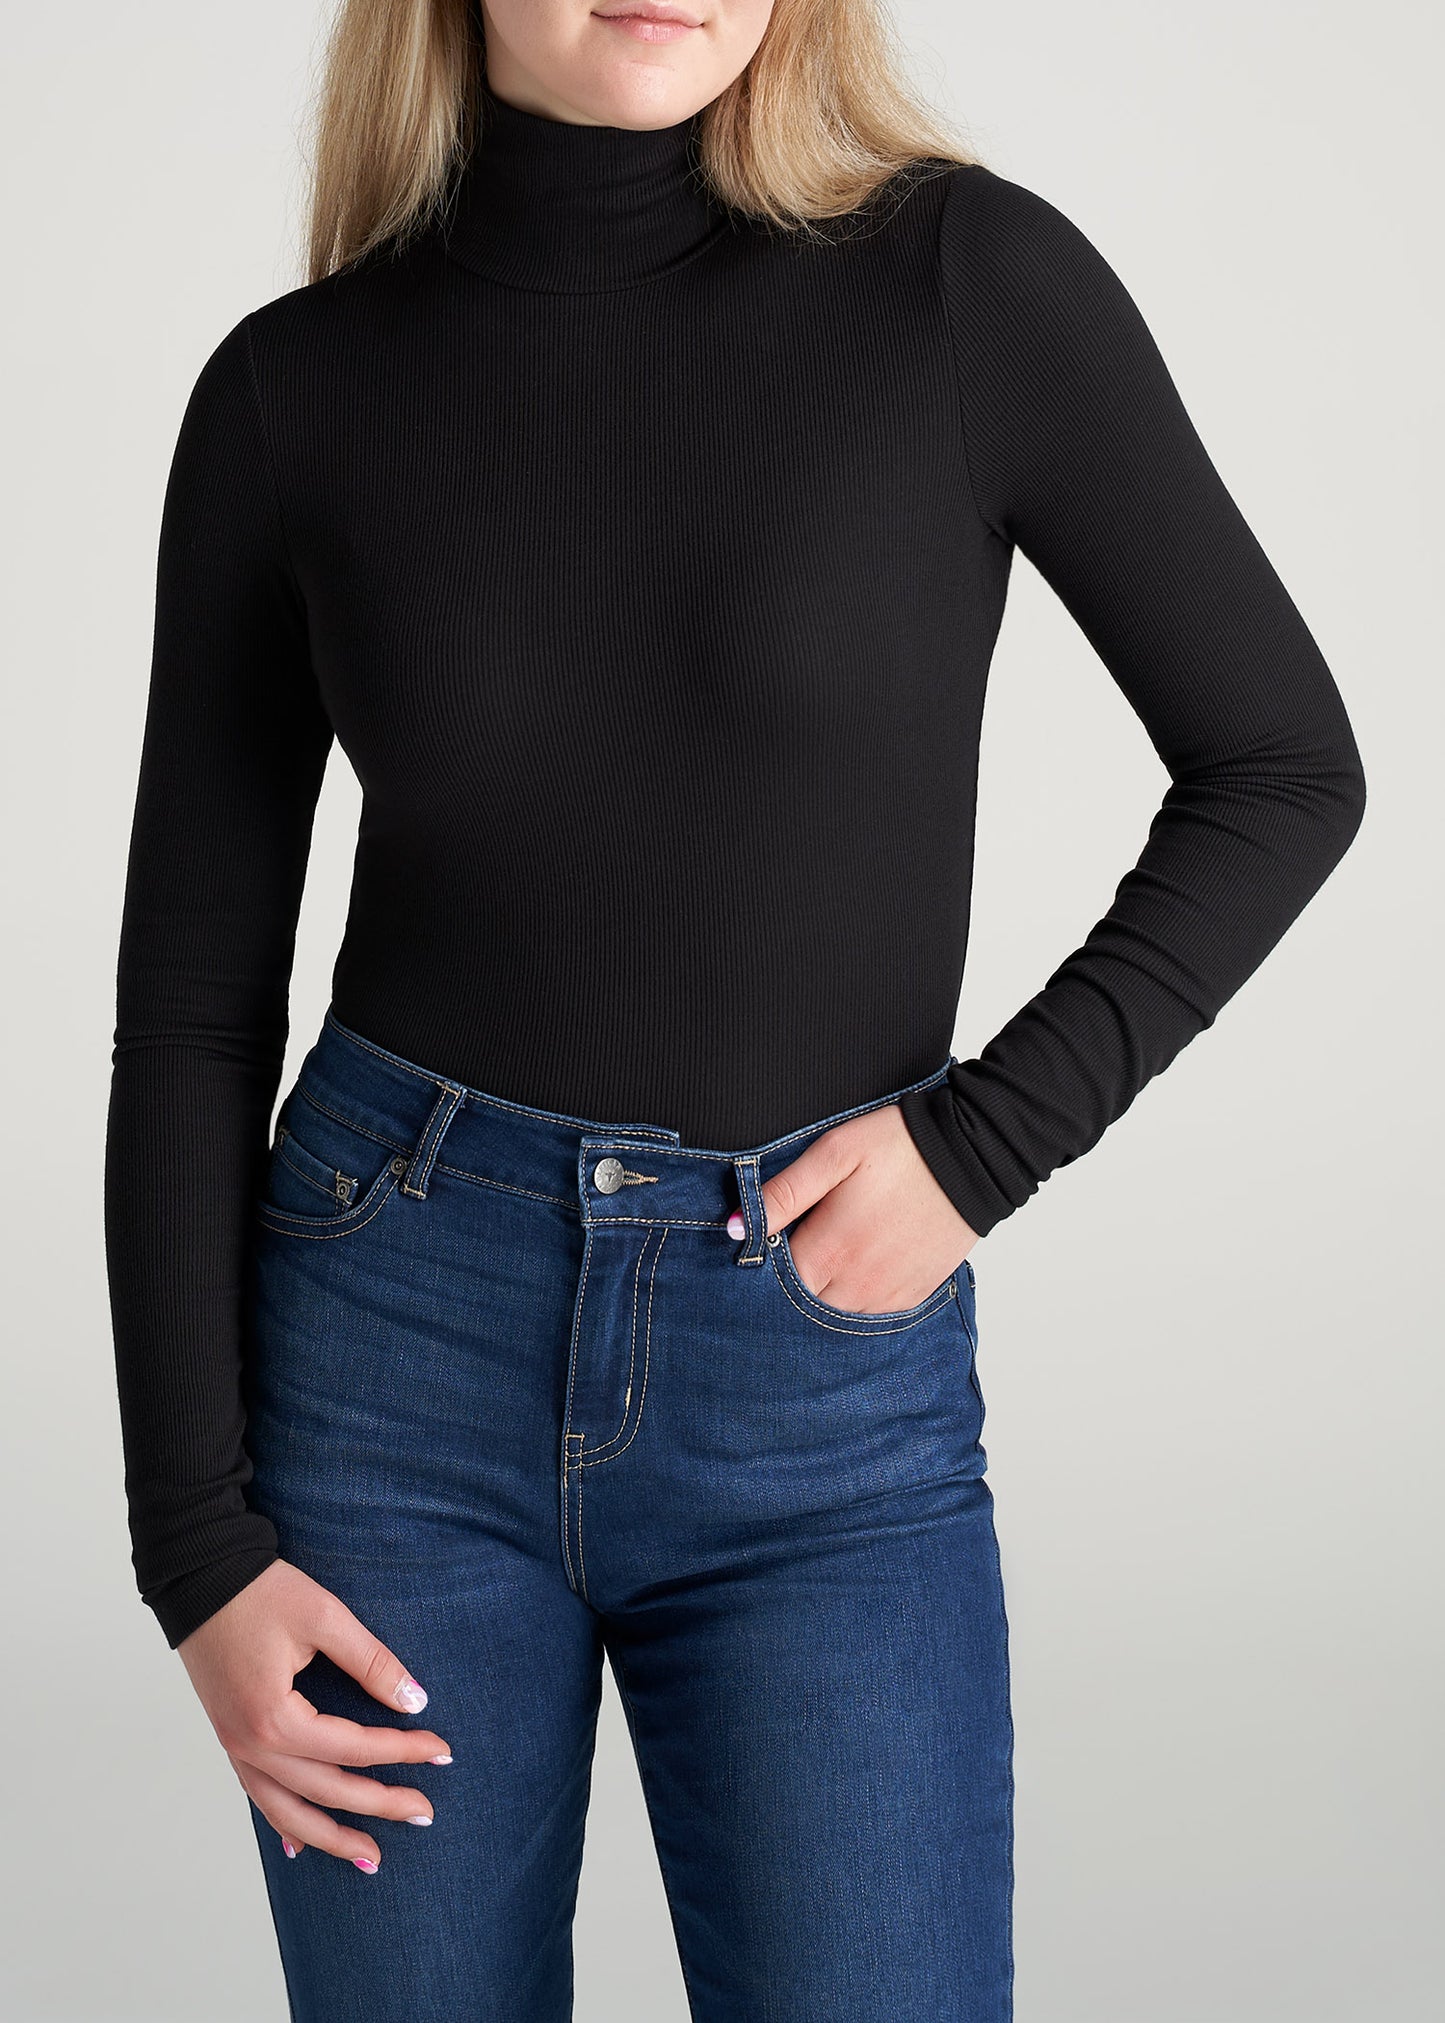 American-Tall-Women-Fitted-LongSleeve-Ribbed-TurtleNeck-Black-front